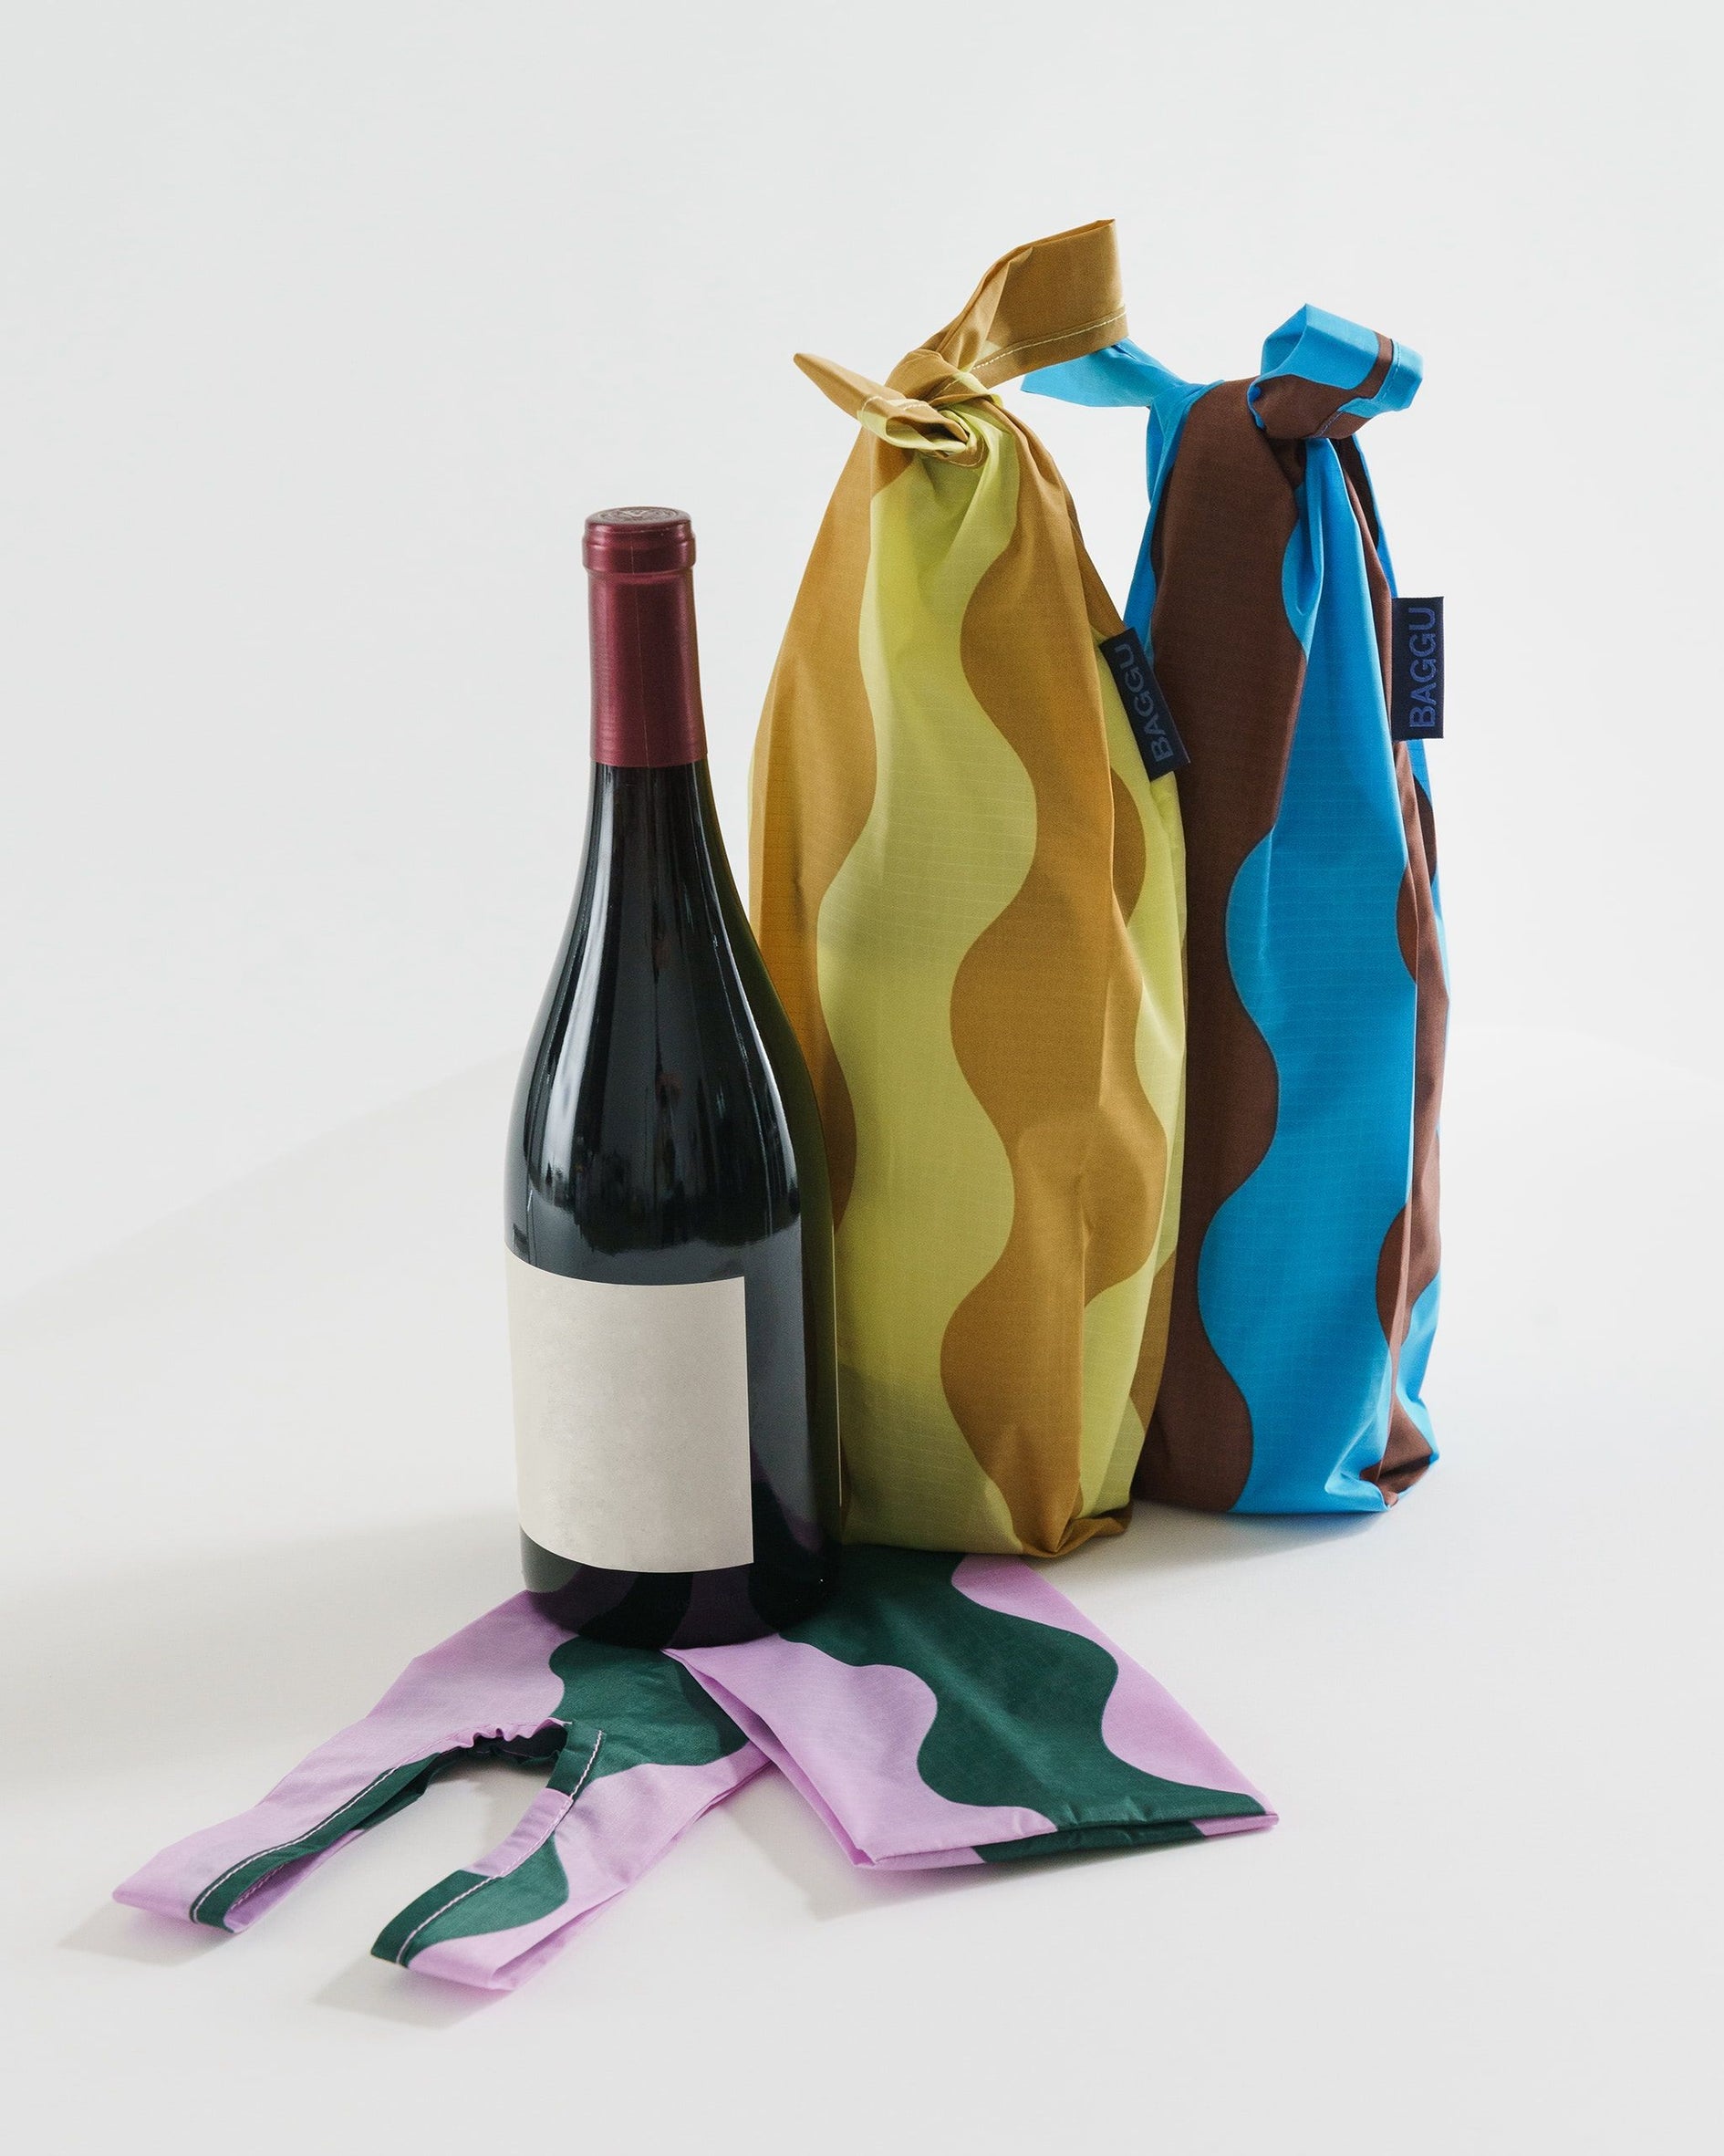 Wine Bottle Gift Bags at Great Wholesale Prices